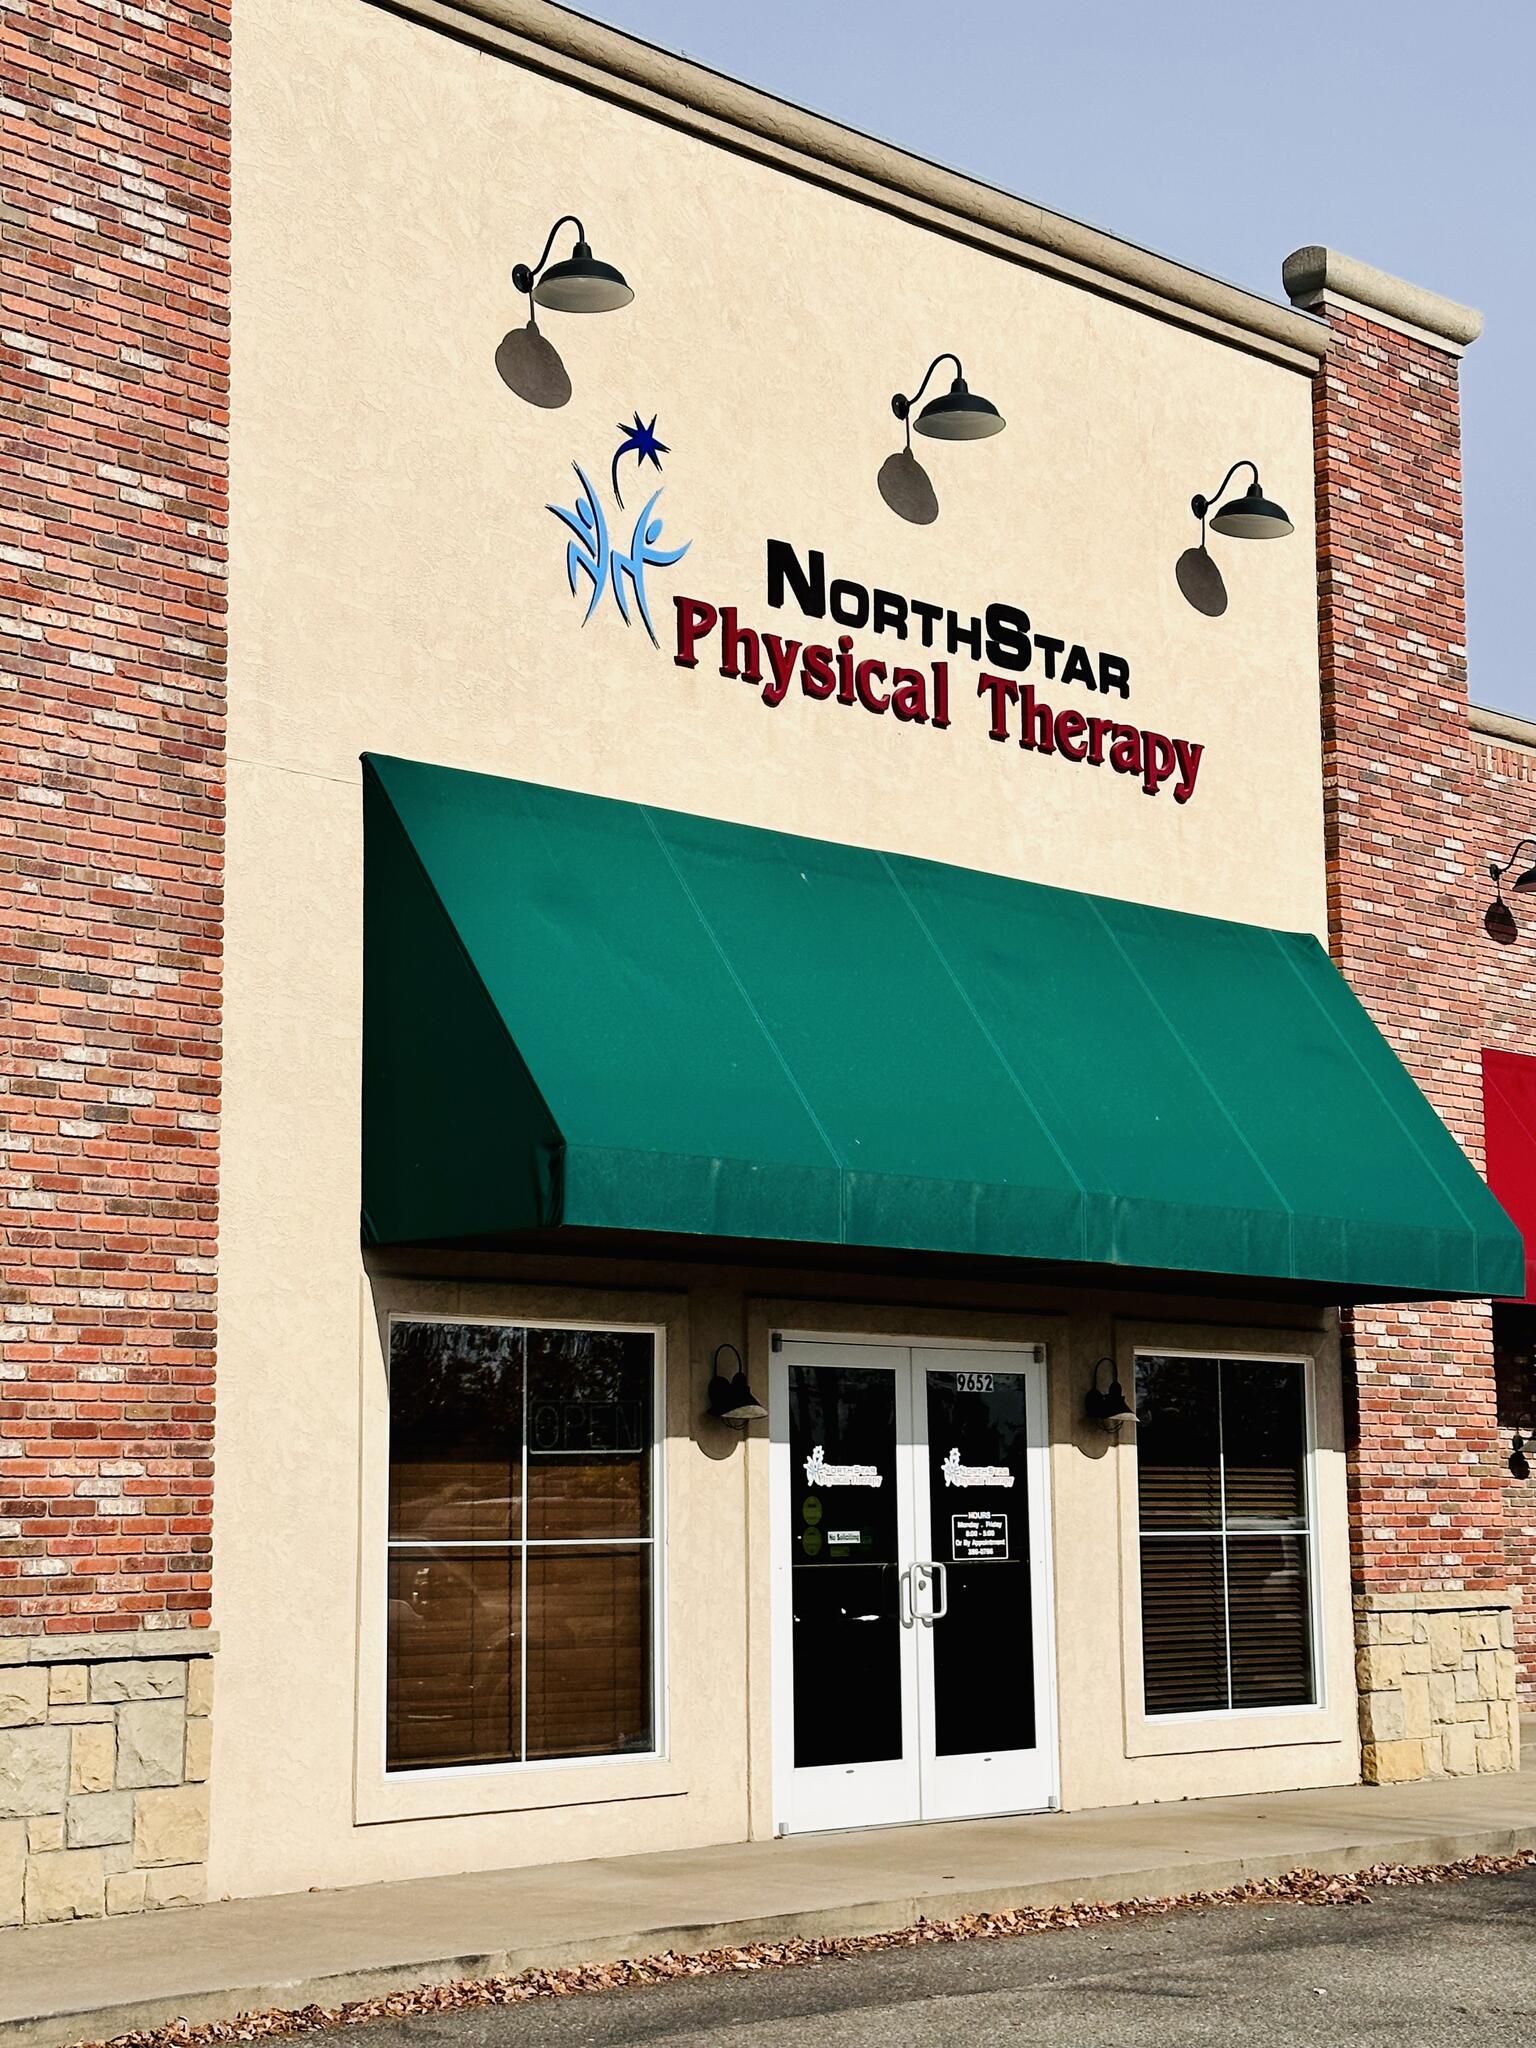 NorthStar Physical Therapy 9652 W State St, Star Idaho 83669